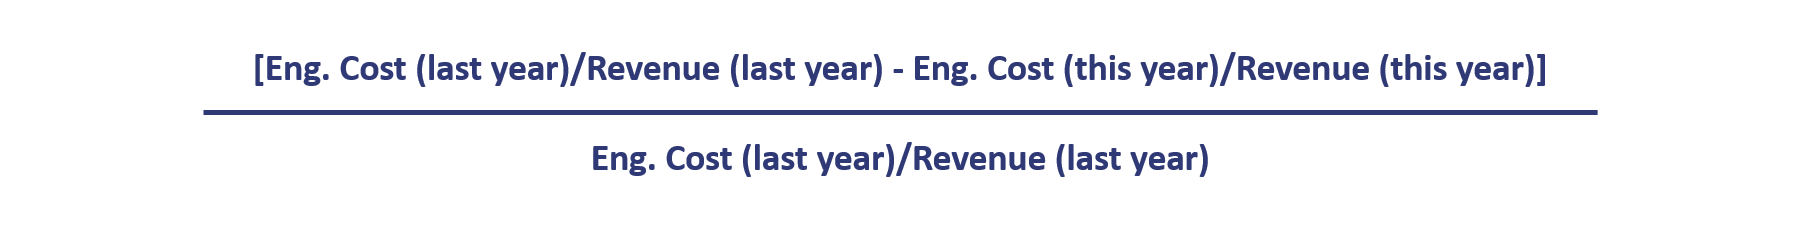 calculate engineering cost year per year